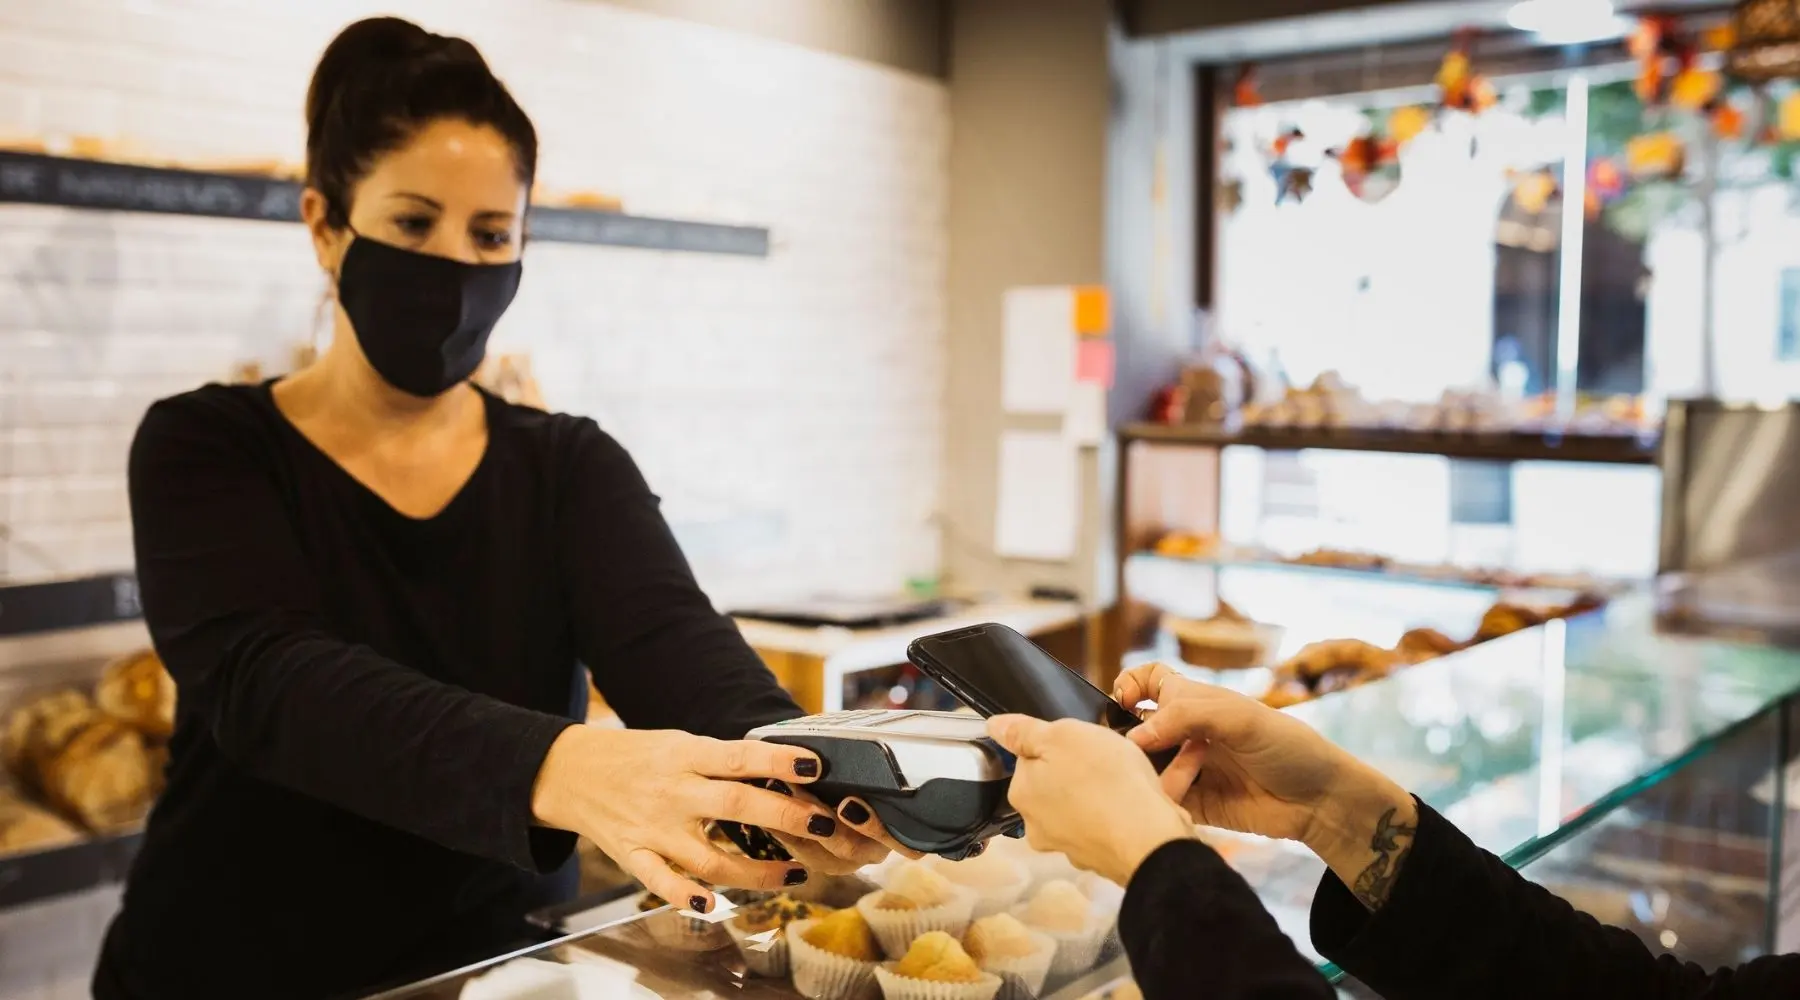 A person pays using their phone, the cashier wears a mask.